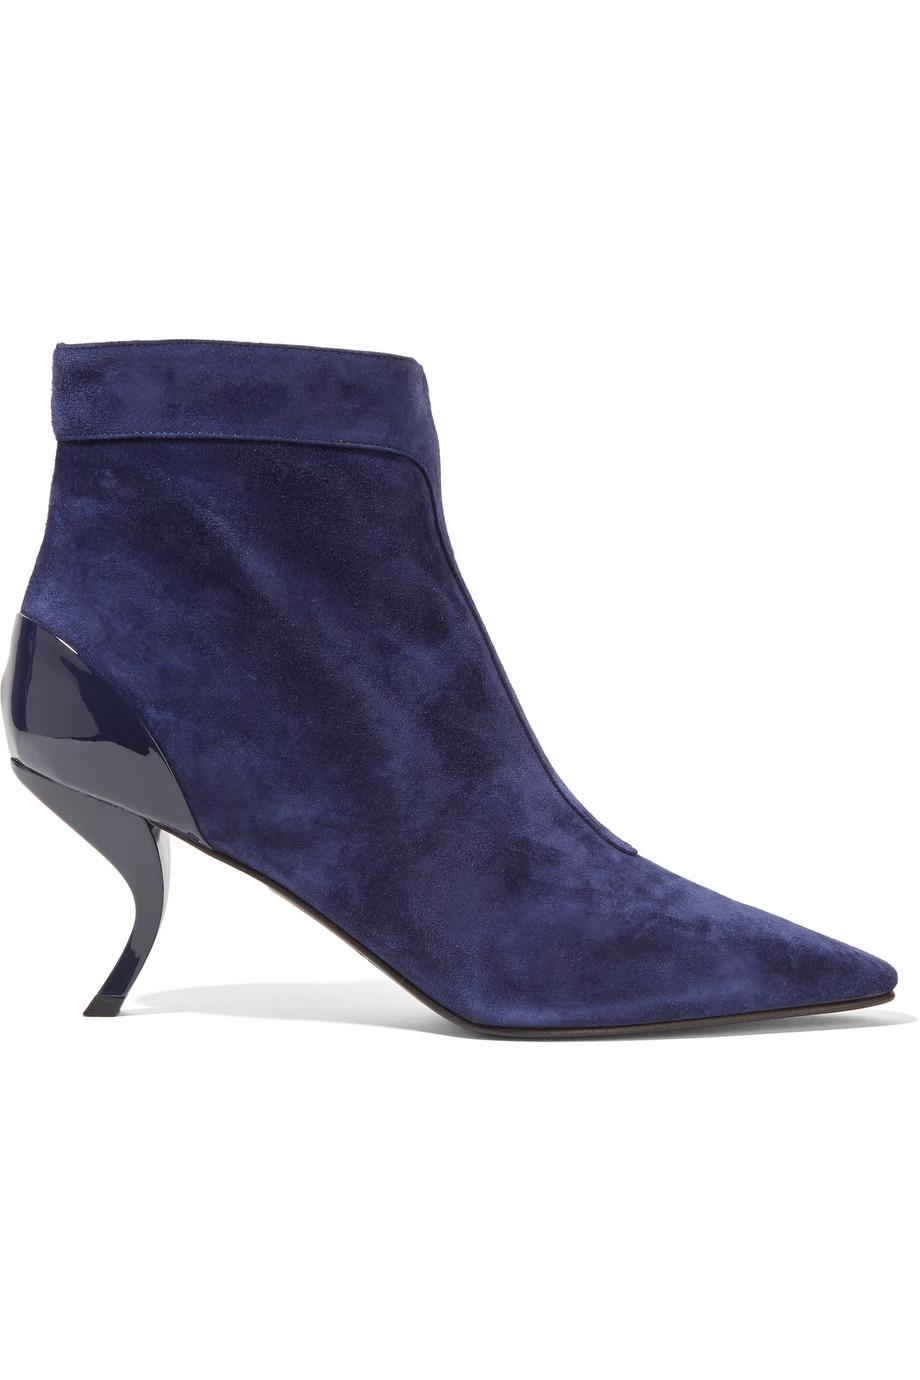 Roger Vivier Patent Leather-trimmed Suede Ankle Boots | ModeSens